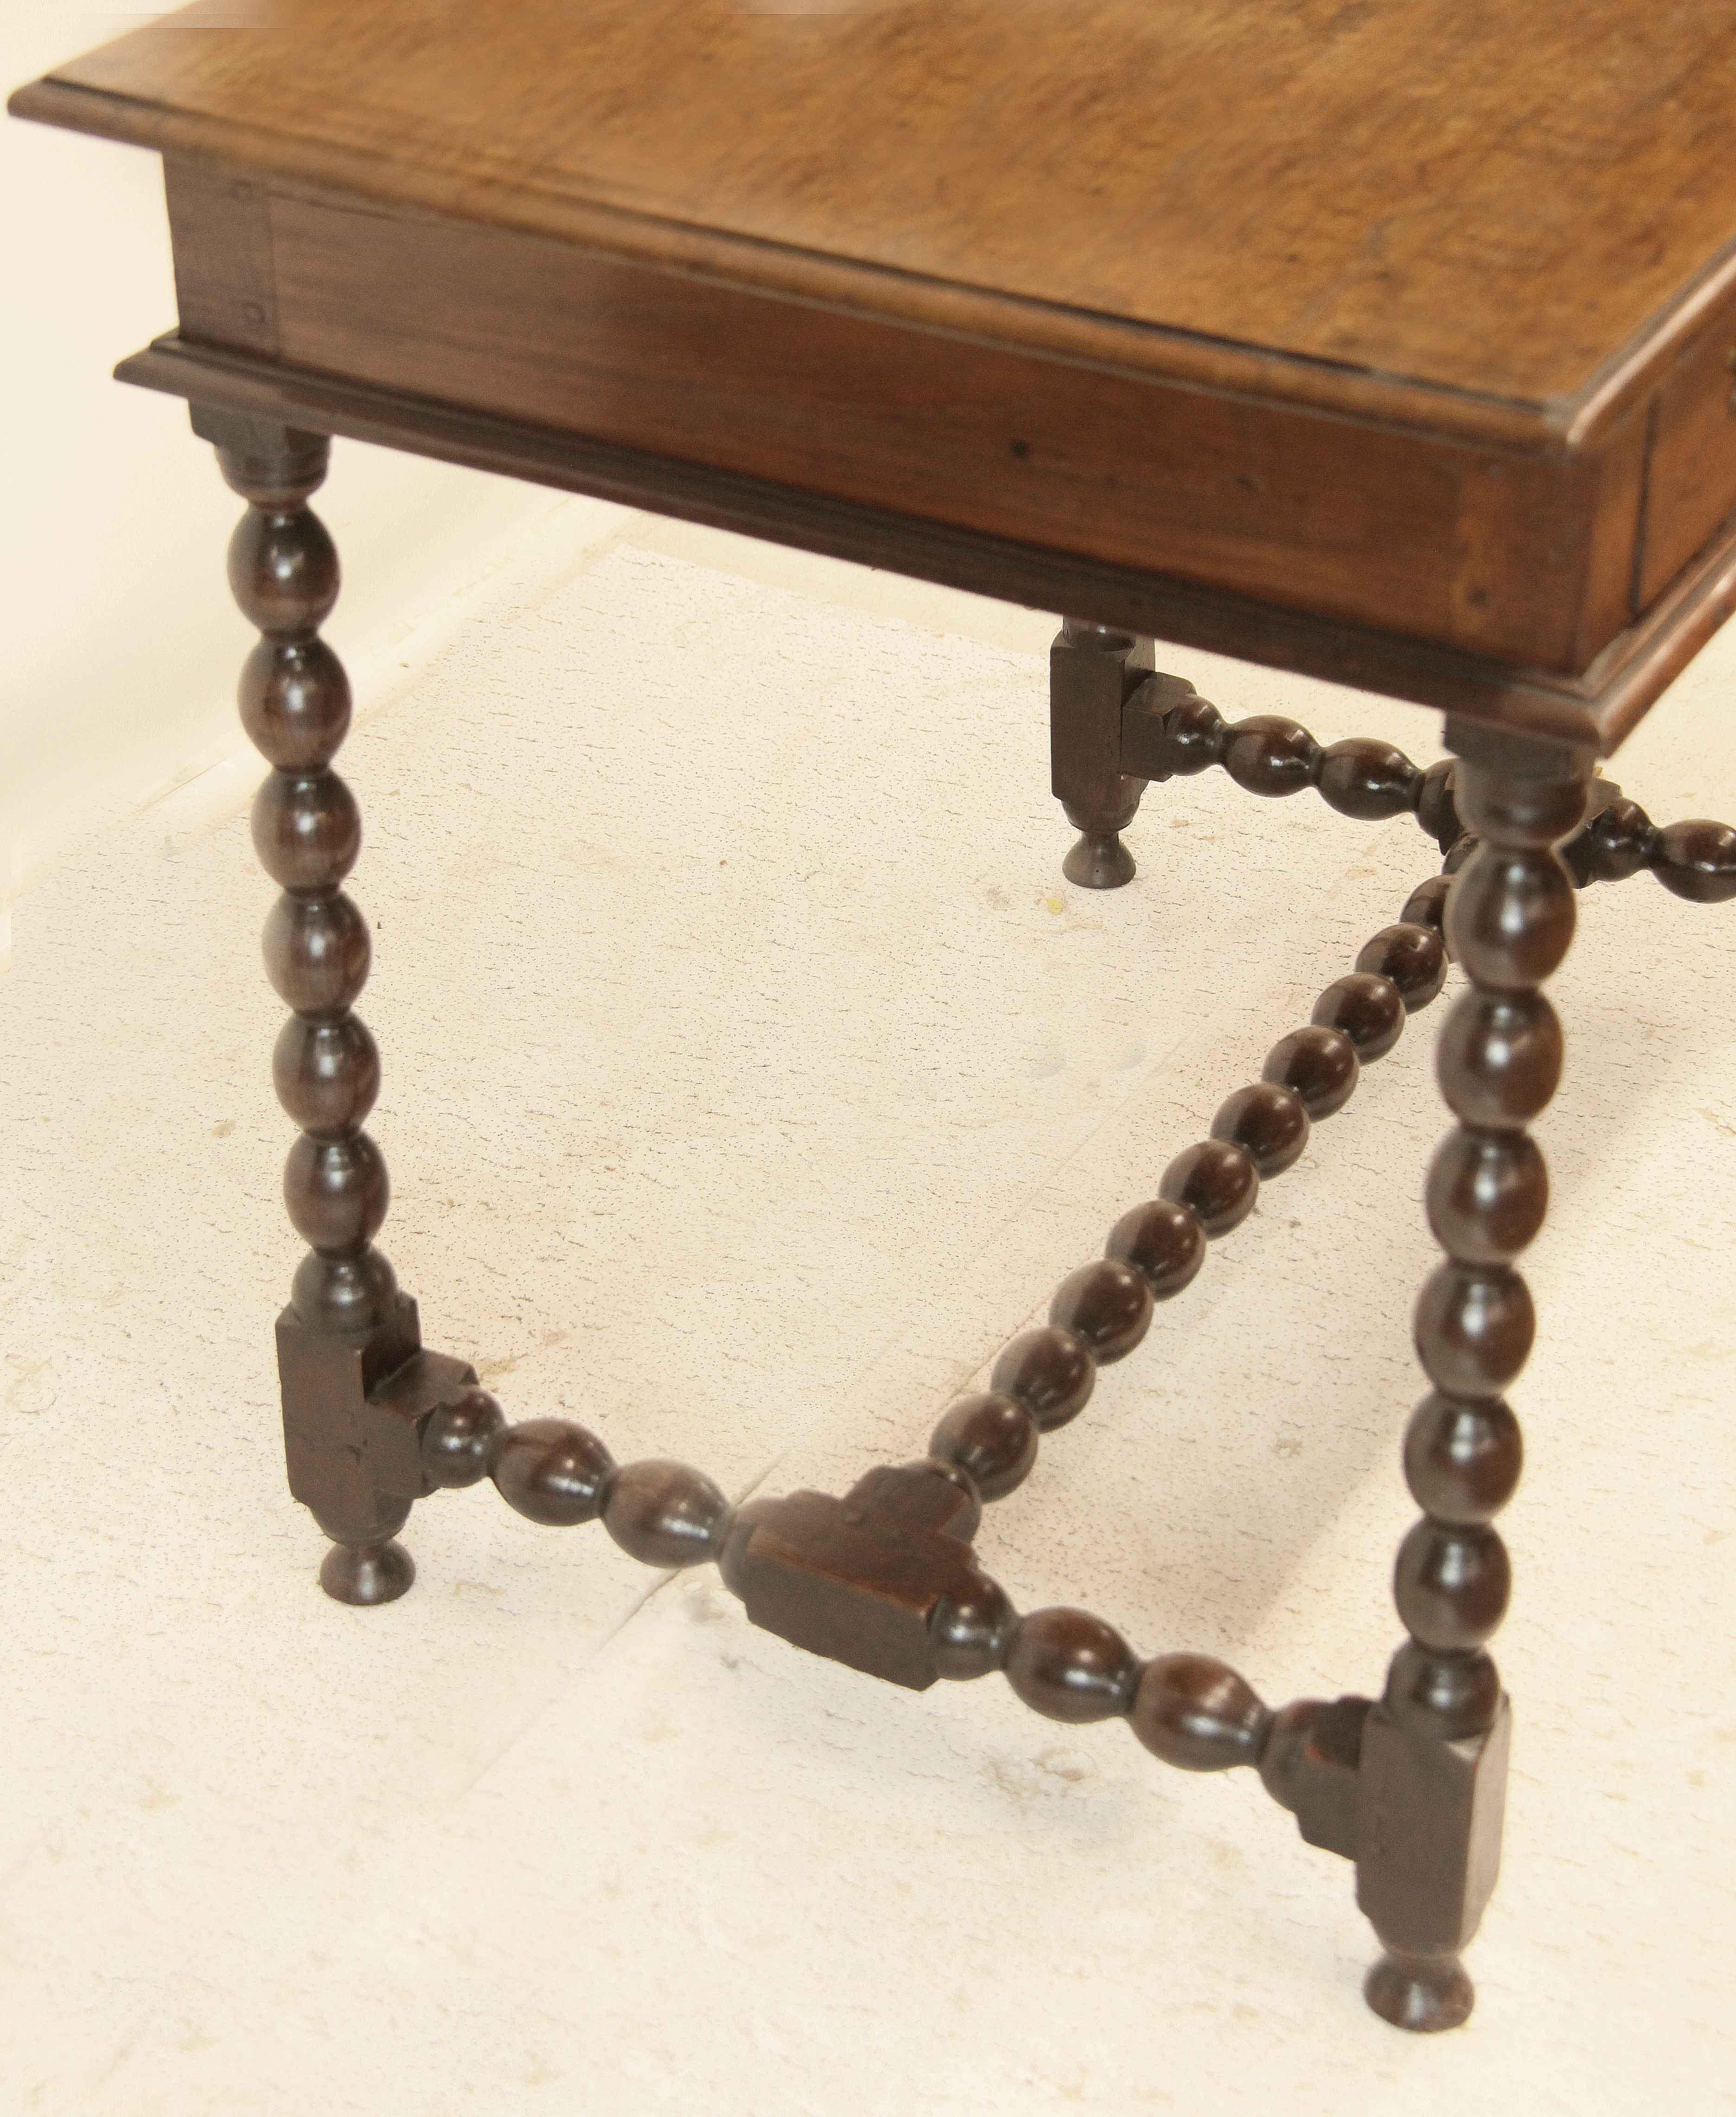 Early 18th century oak one drawer table, the top with molded edge all around, single drawer with etched brass pulls and escutcheon( not original but hand made and correct for the period). The legs and connecting stretchers with bobbin turnings,